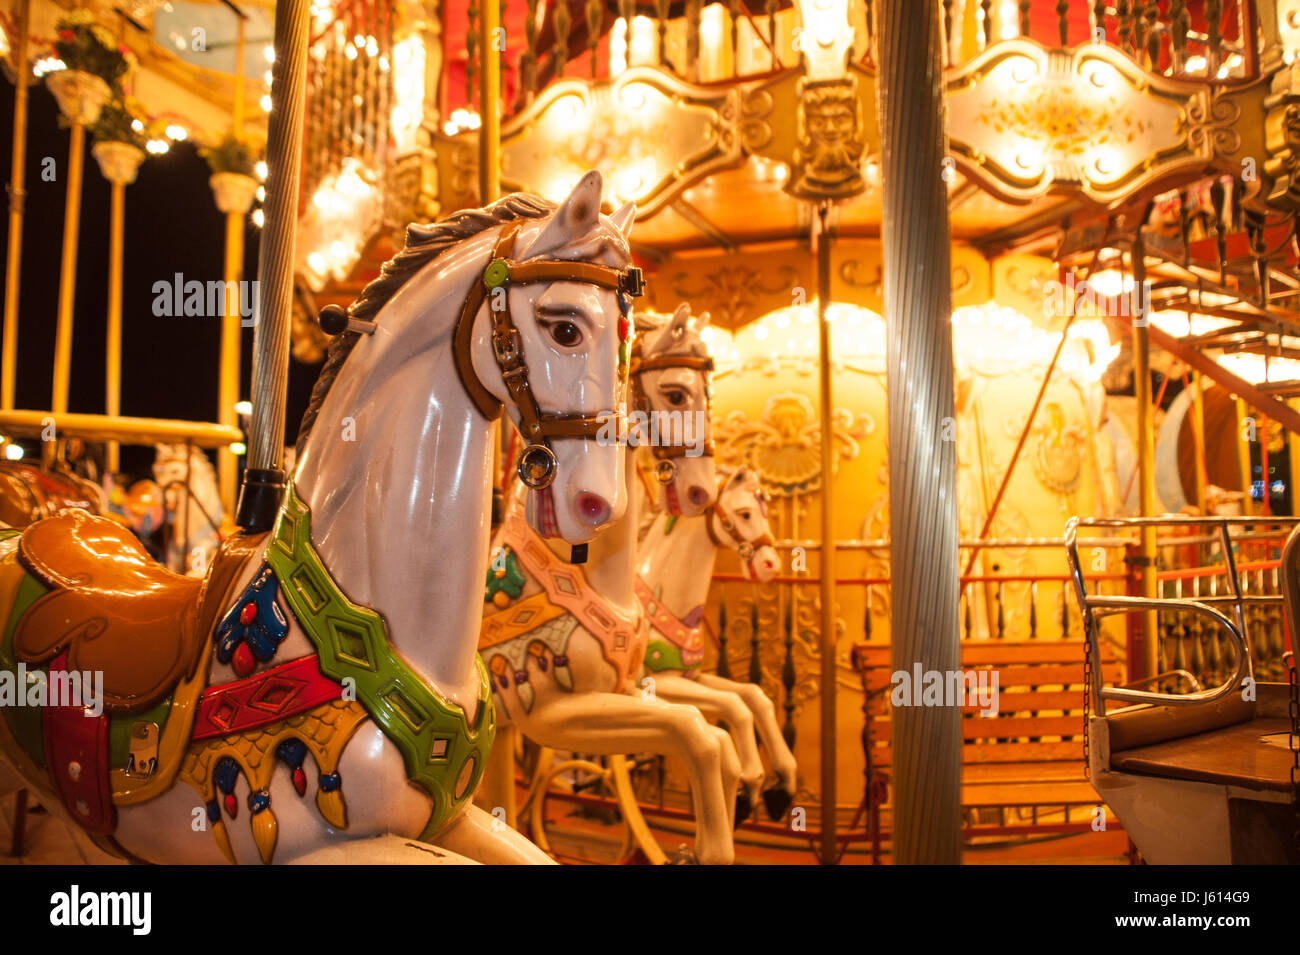 Old carousel with wooden horse in Paris, France Stock Photo